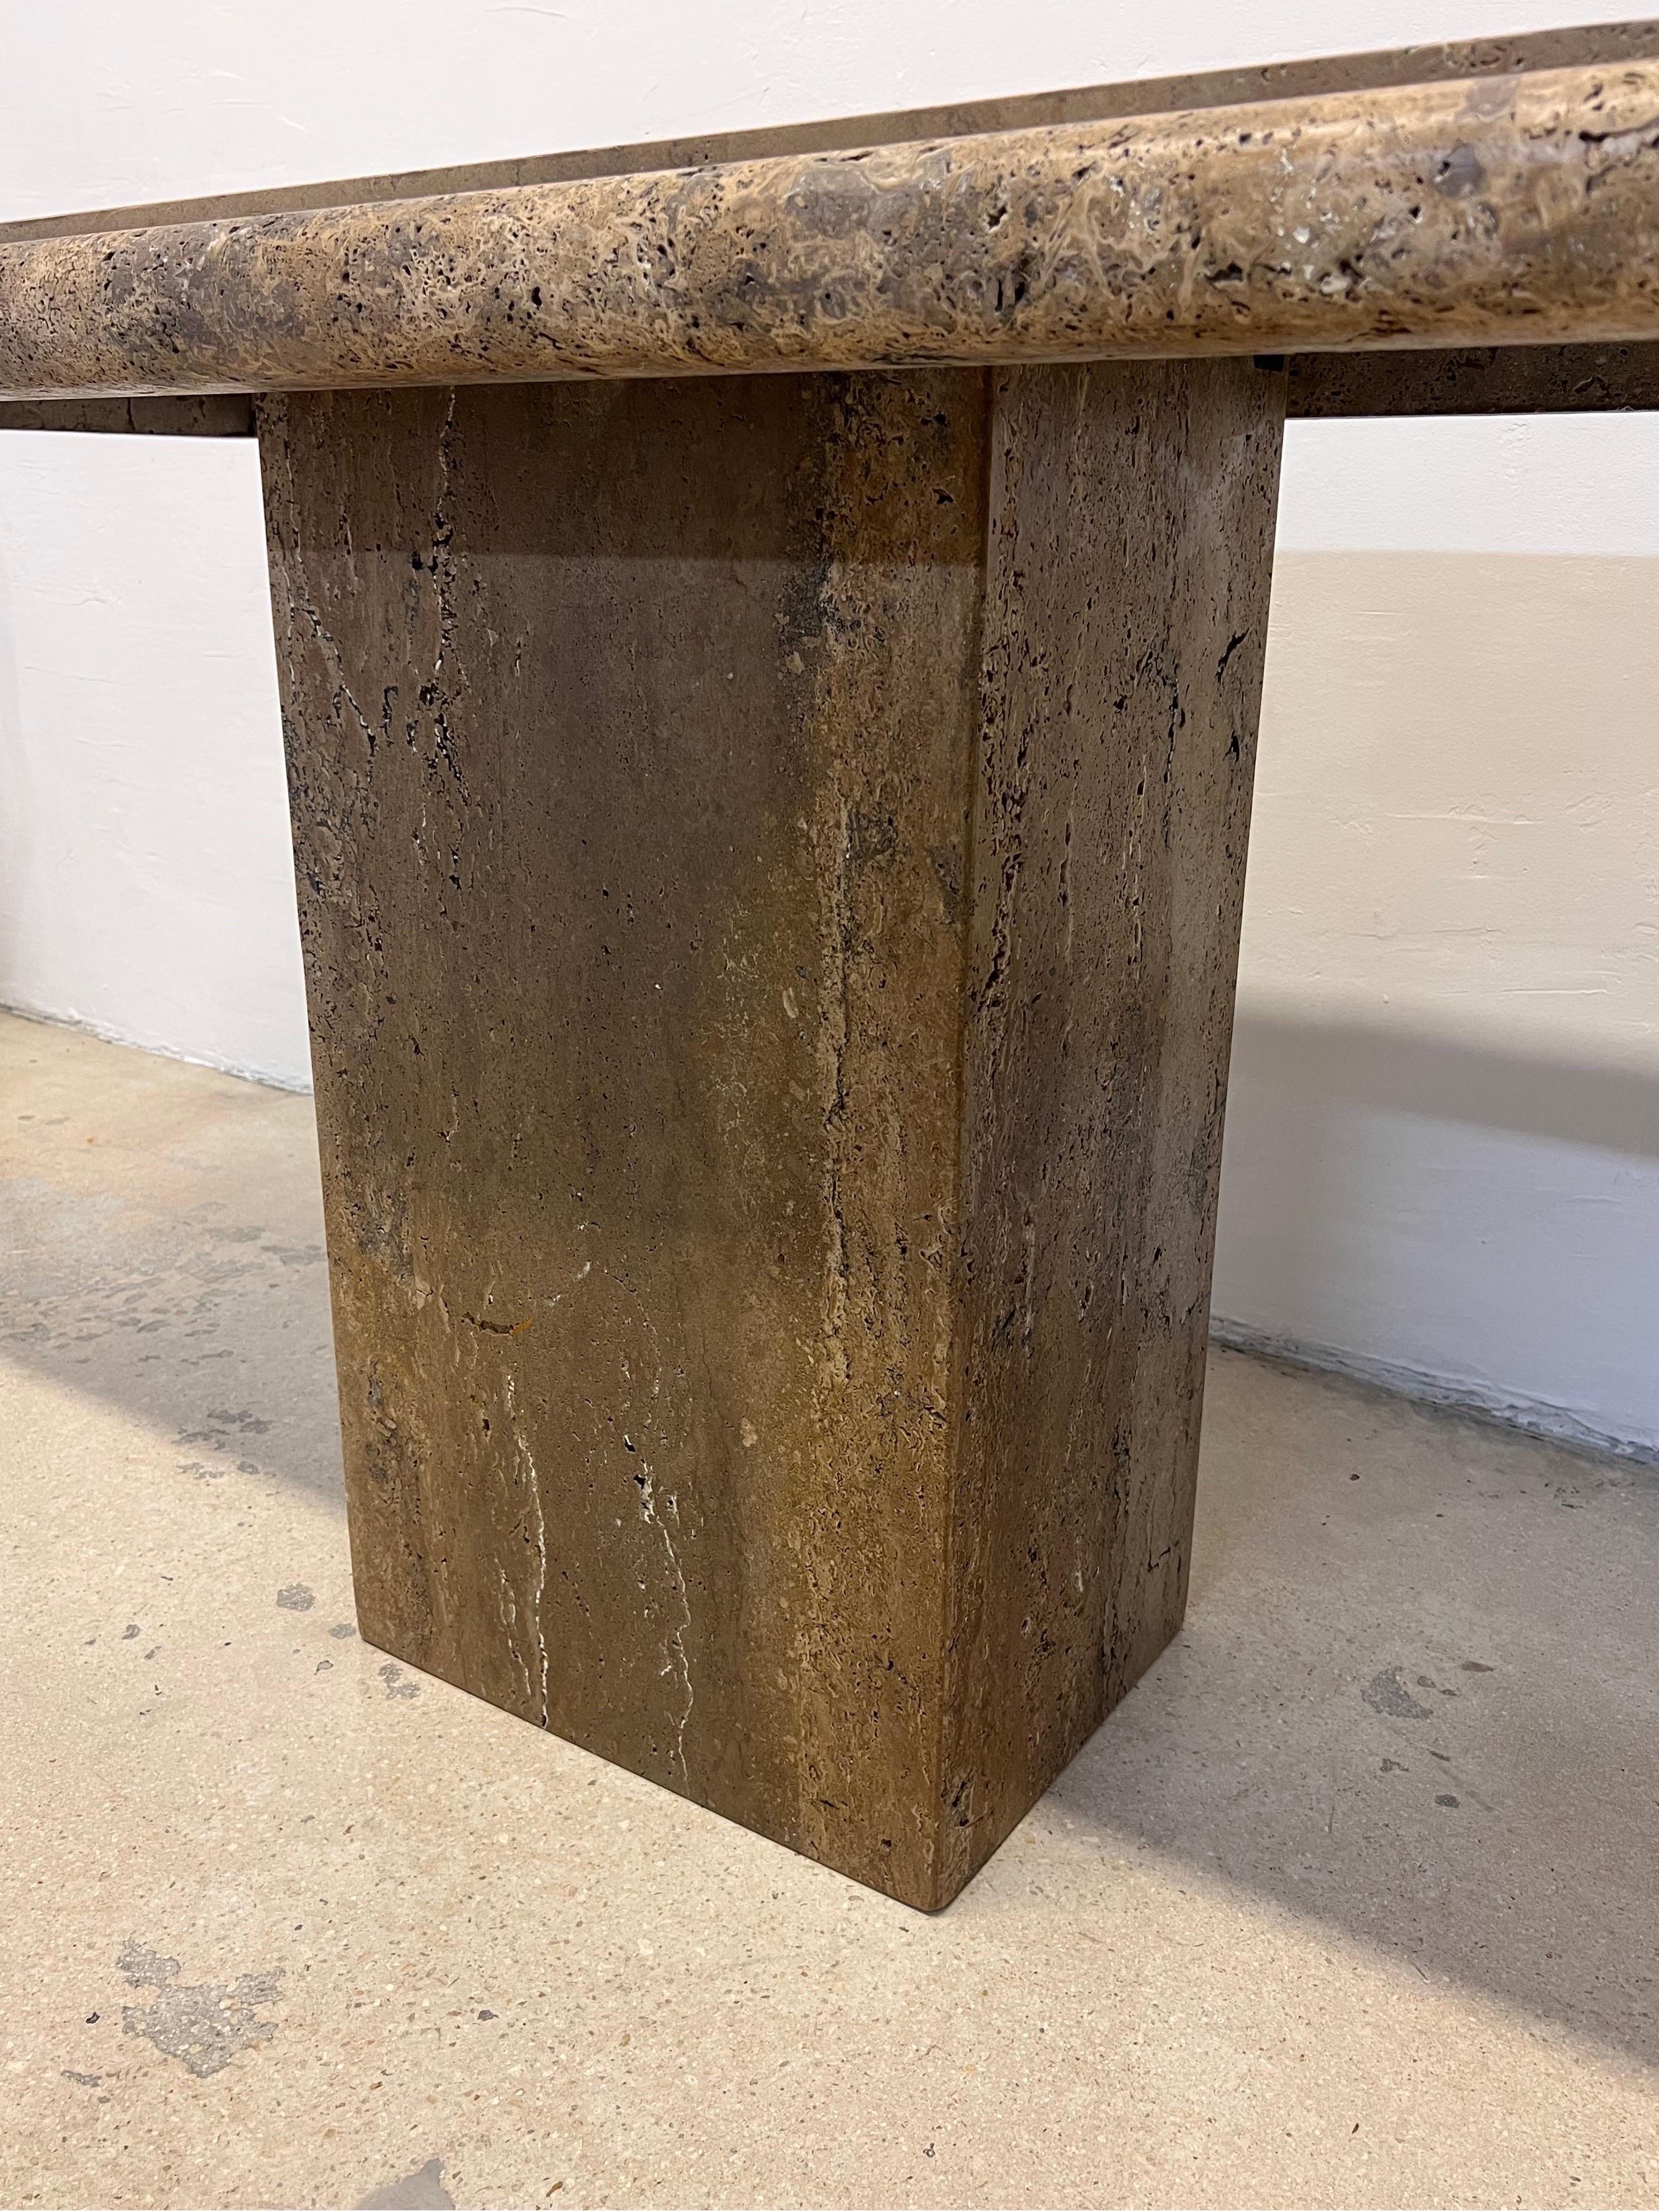 Polished Italian Travertine Bullnose Console Table, Italy 1970s For Sale 10